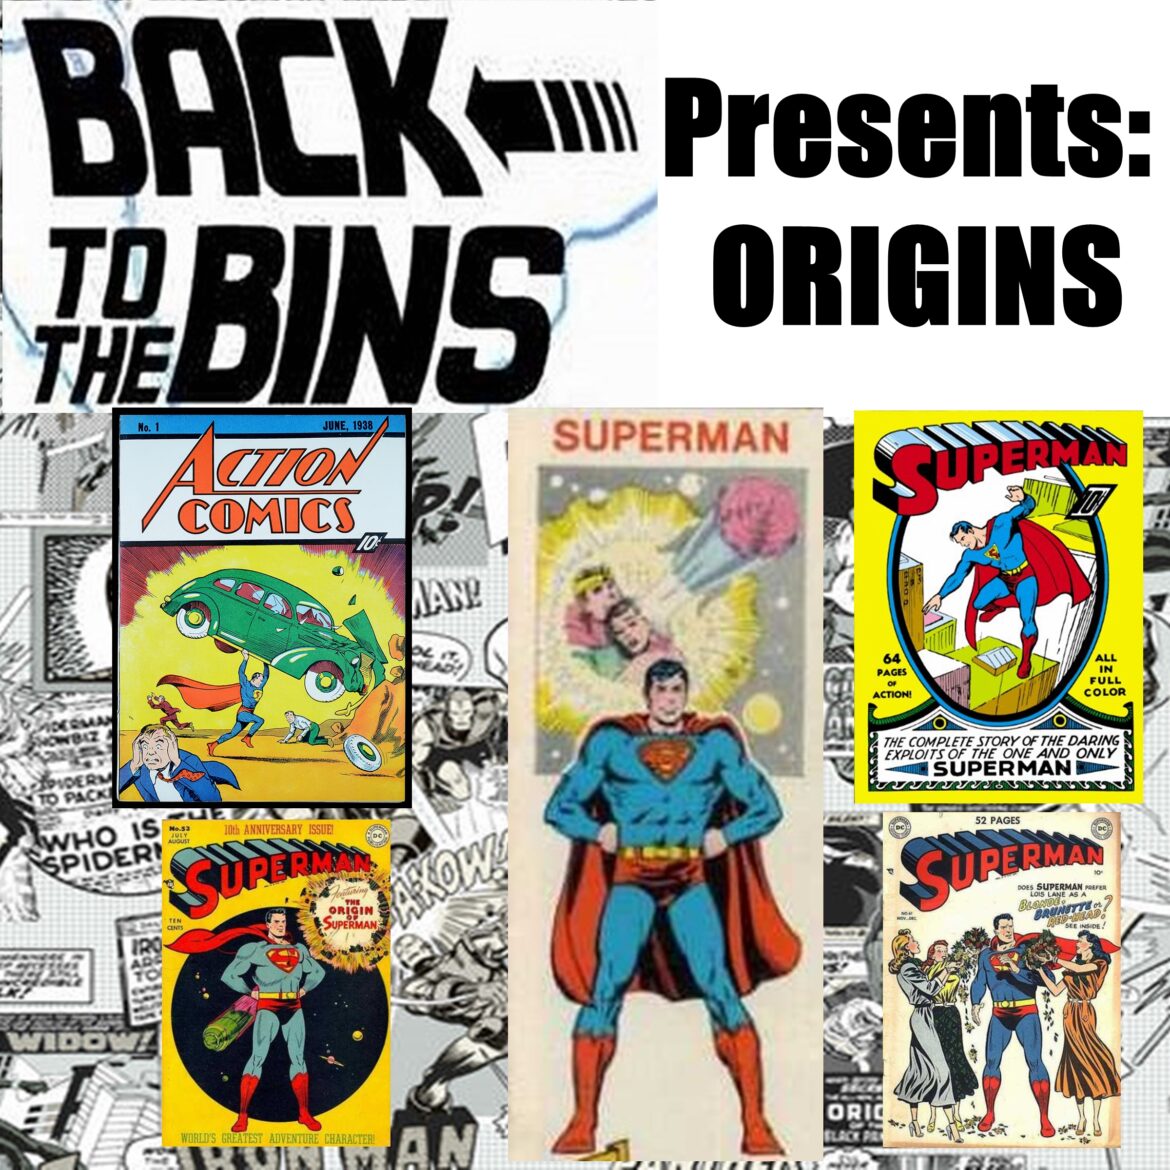 It's time to unveil another new feature on Back to the Bins as Dave and Scott take an in depth look at the origin of Superman as it developed over the years!  If you have half as much fun listening as they did recording it, you're gonna love it!